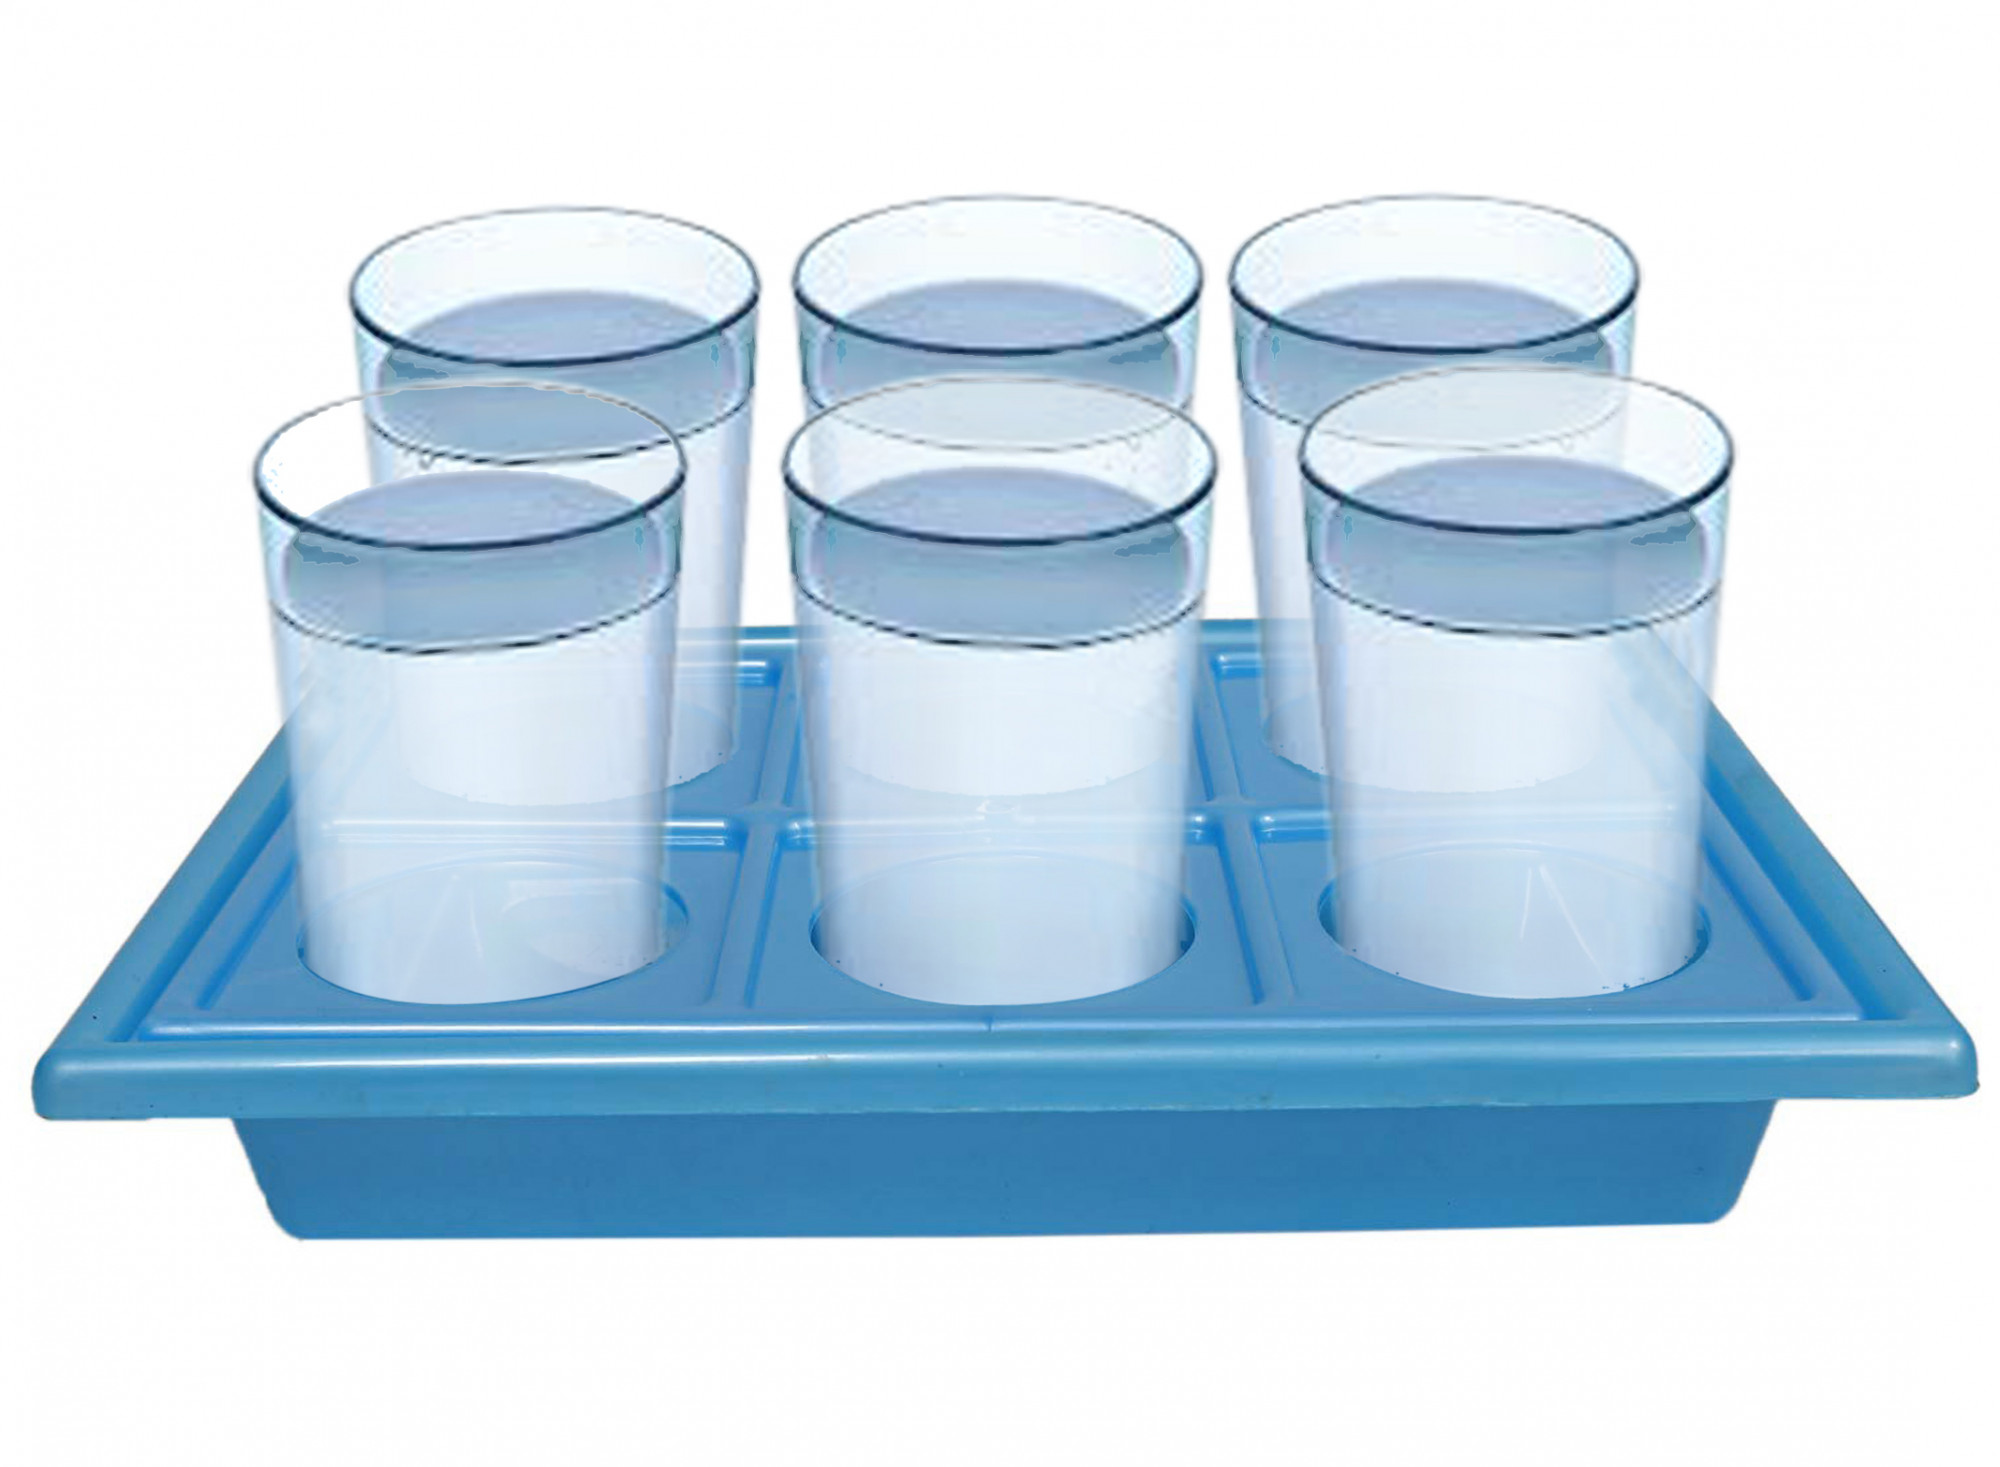 Kuber Industries Tray with Cutout Handles, Cup Display for Kitchenware, Plastic Glass Holder, One Size, 6 Slots (Blue)